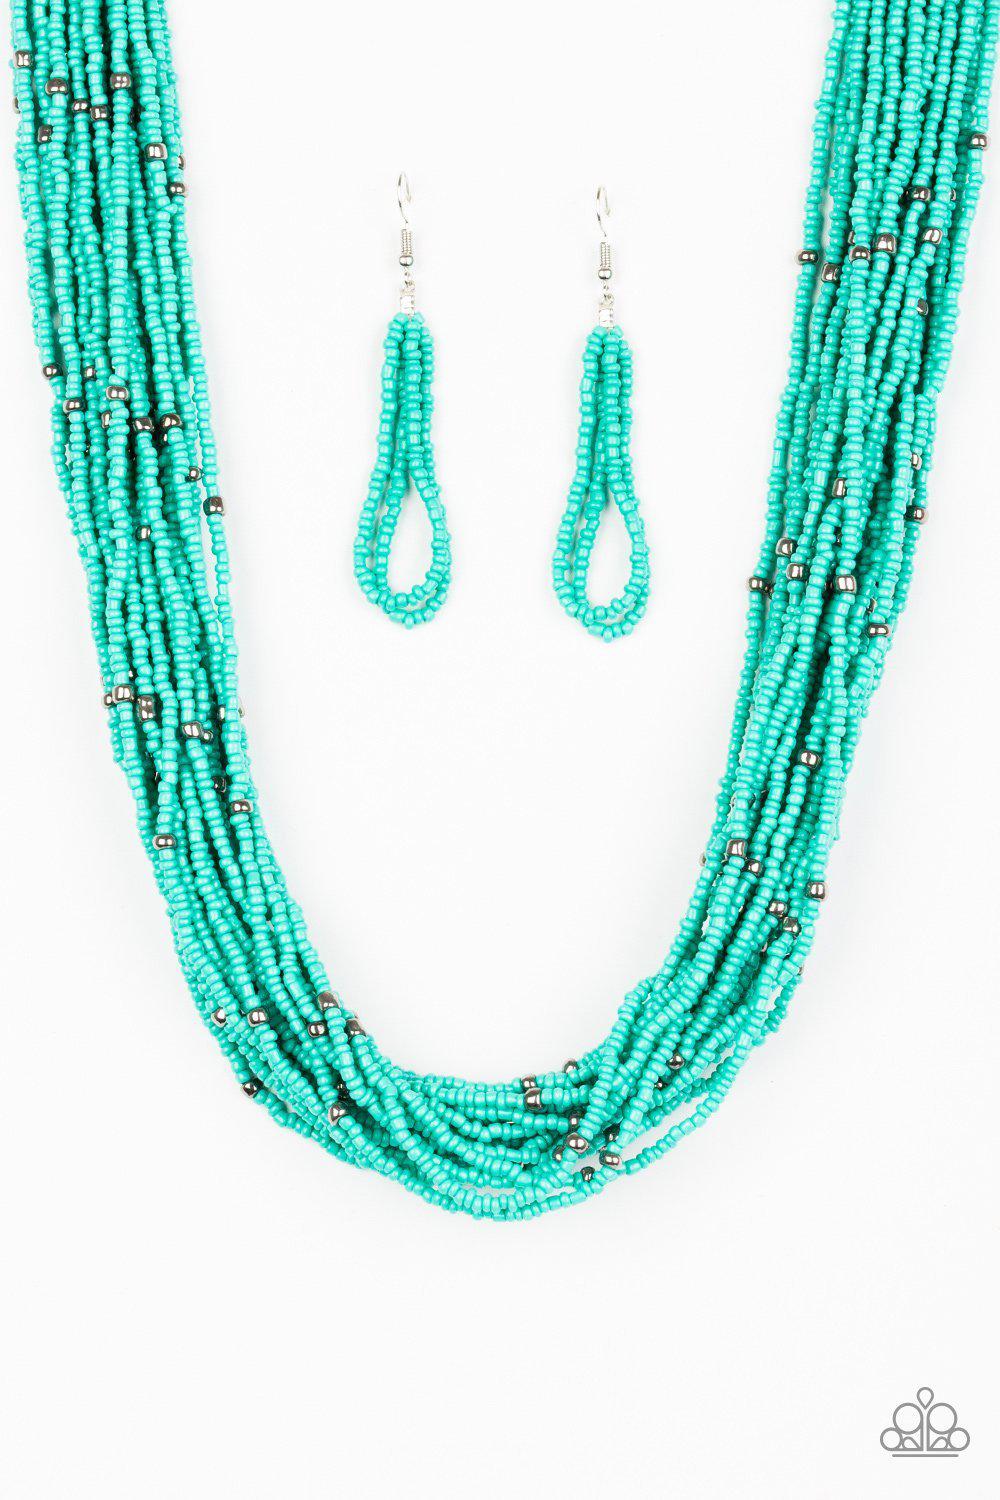 Summer Samba Blue Seed Bead Necklace and matching Earrings - Paparazzi Accessories-CarasShop.com - $5 Jewelry by Cara Jewels